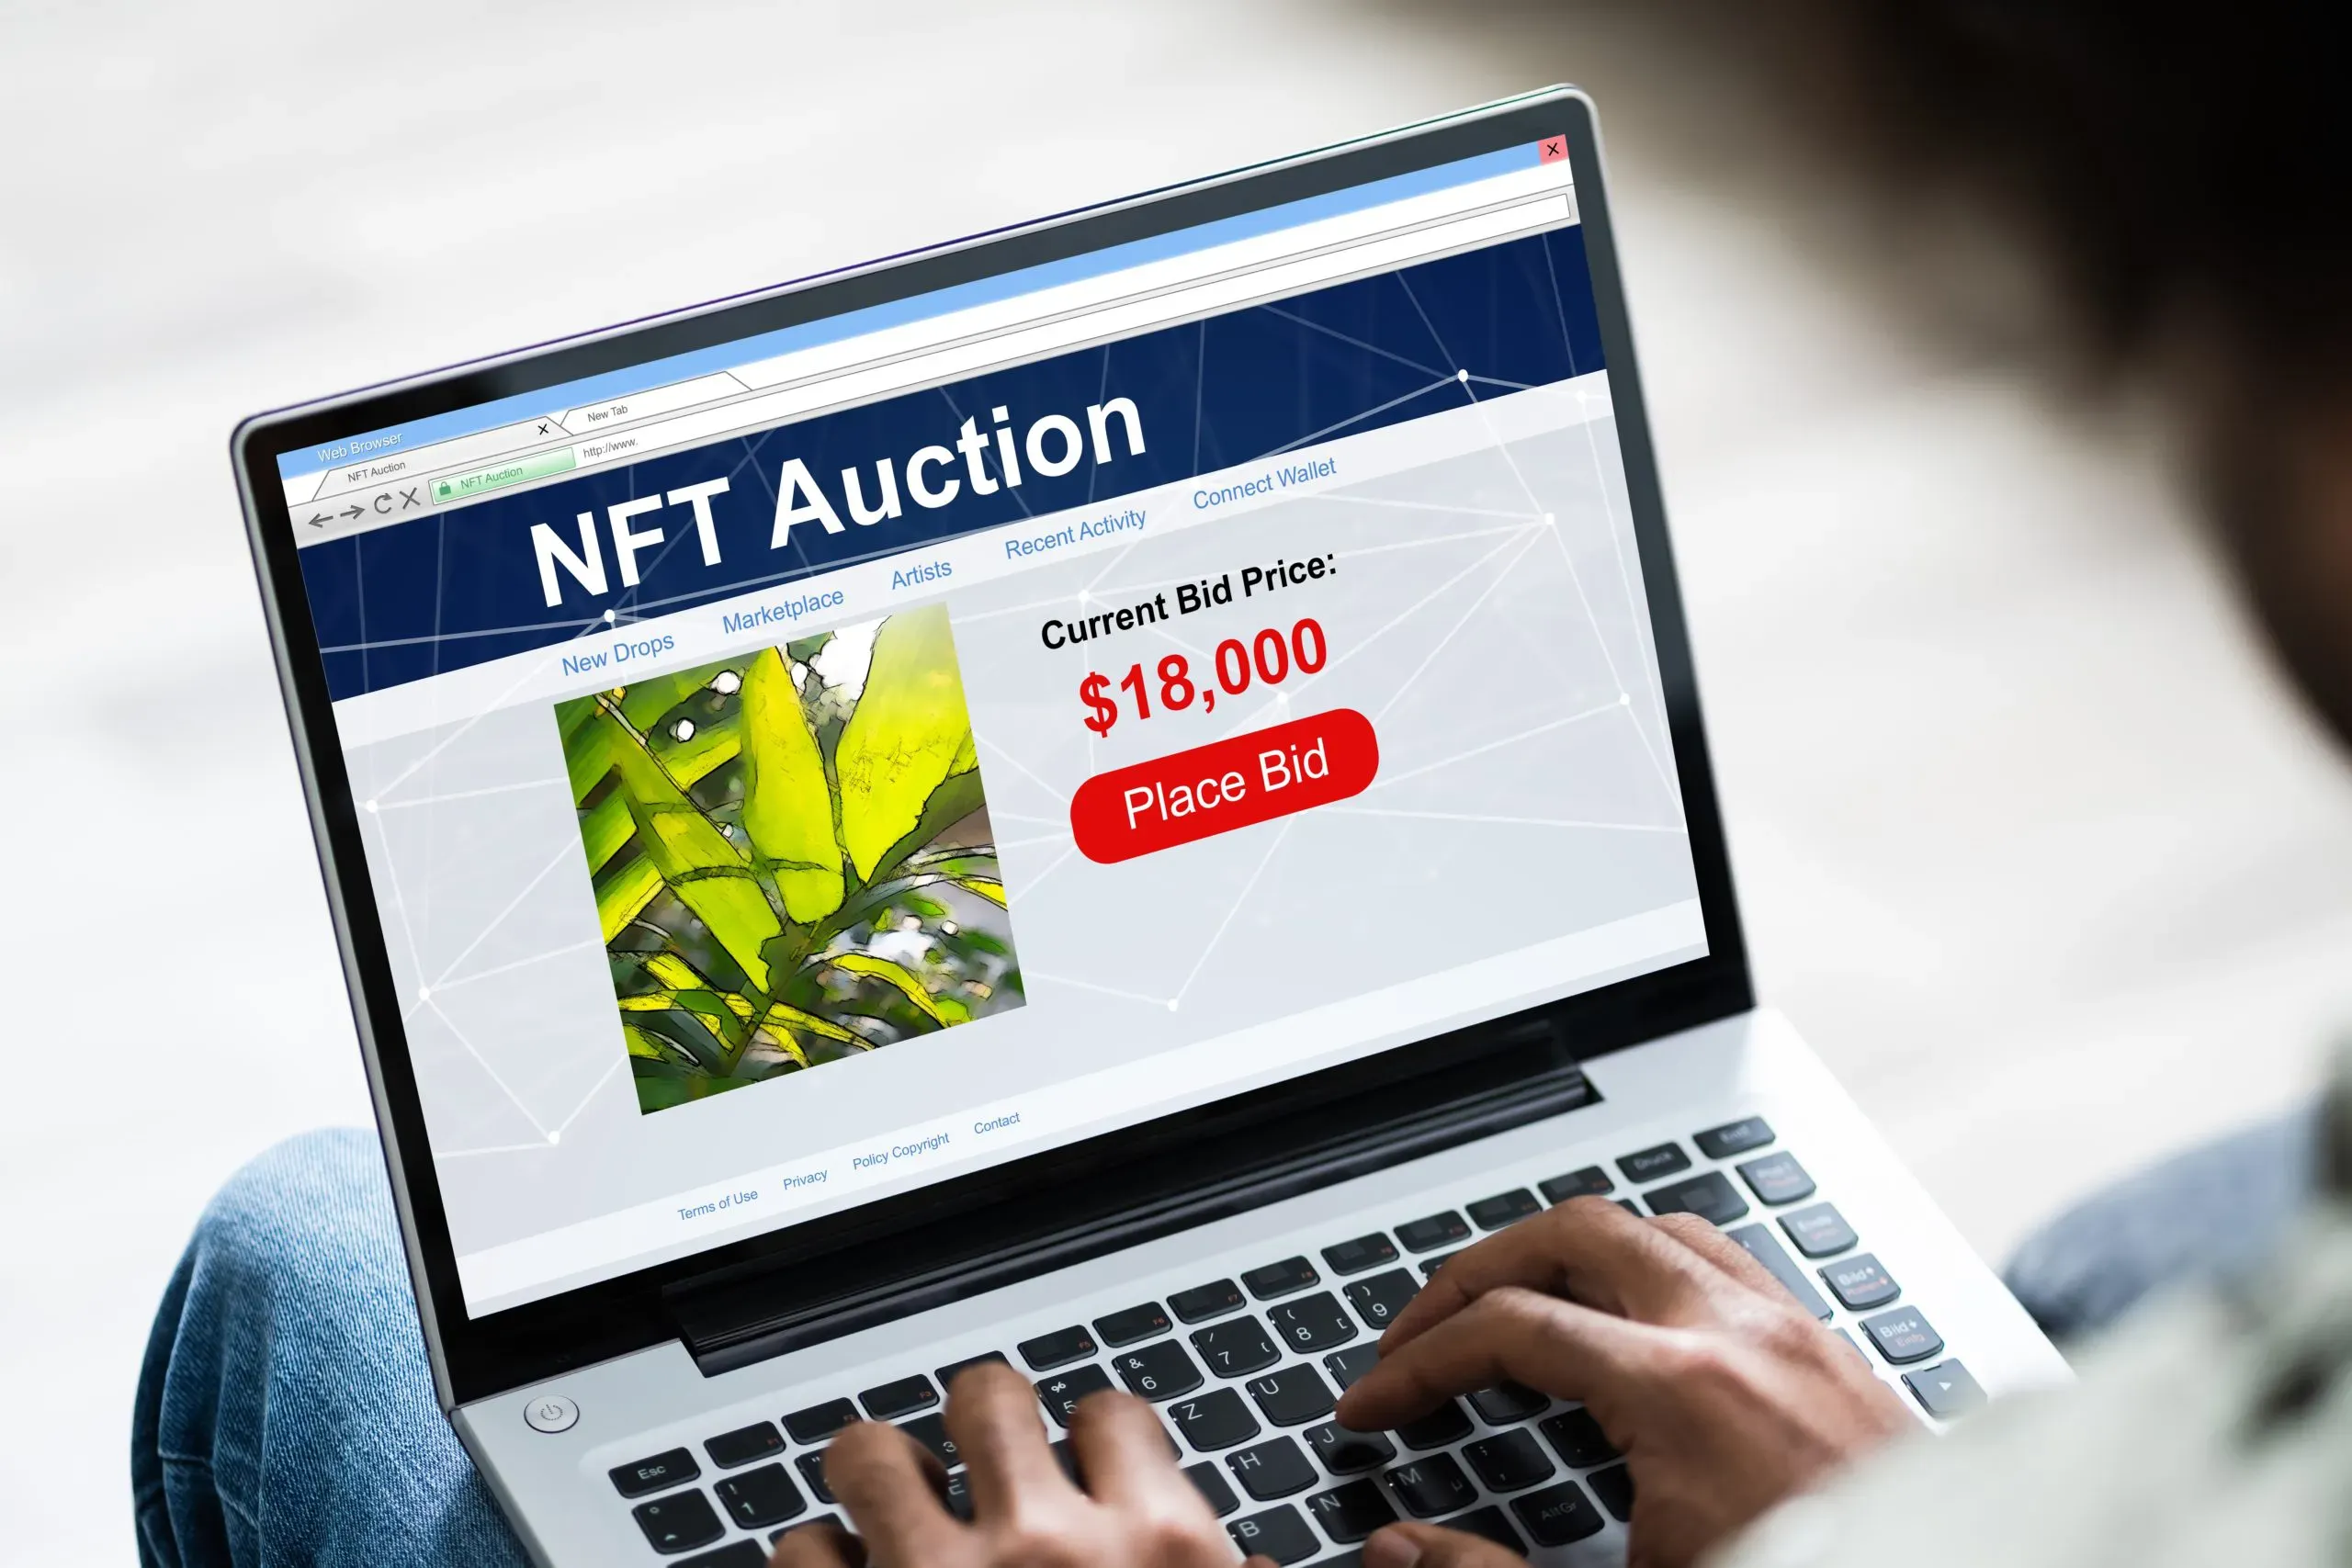 Scality's CEO to Lead NFT Auction for War-hit Ukraine